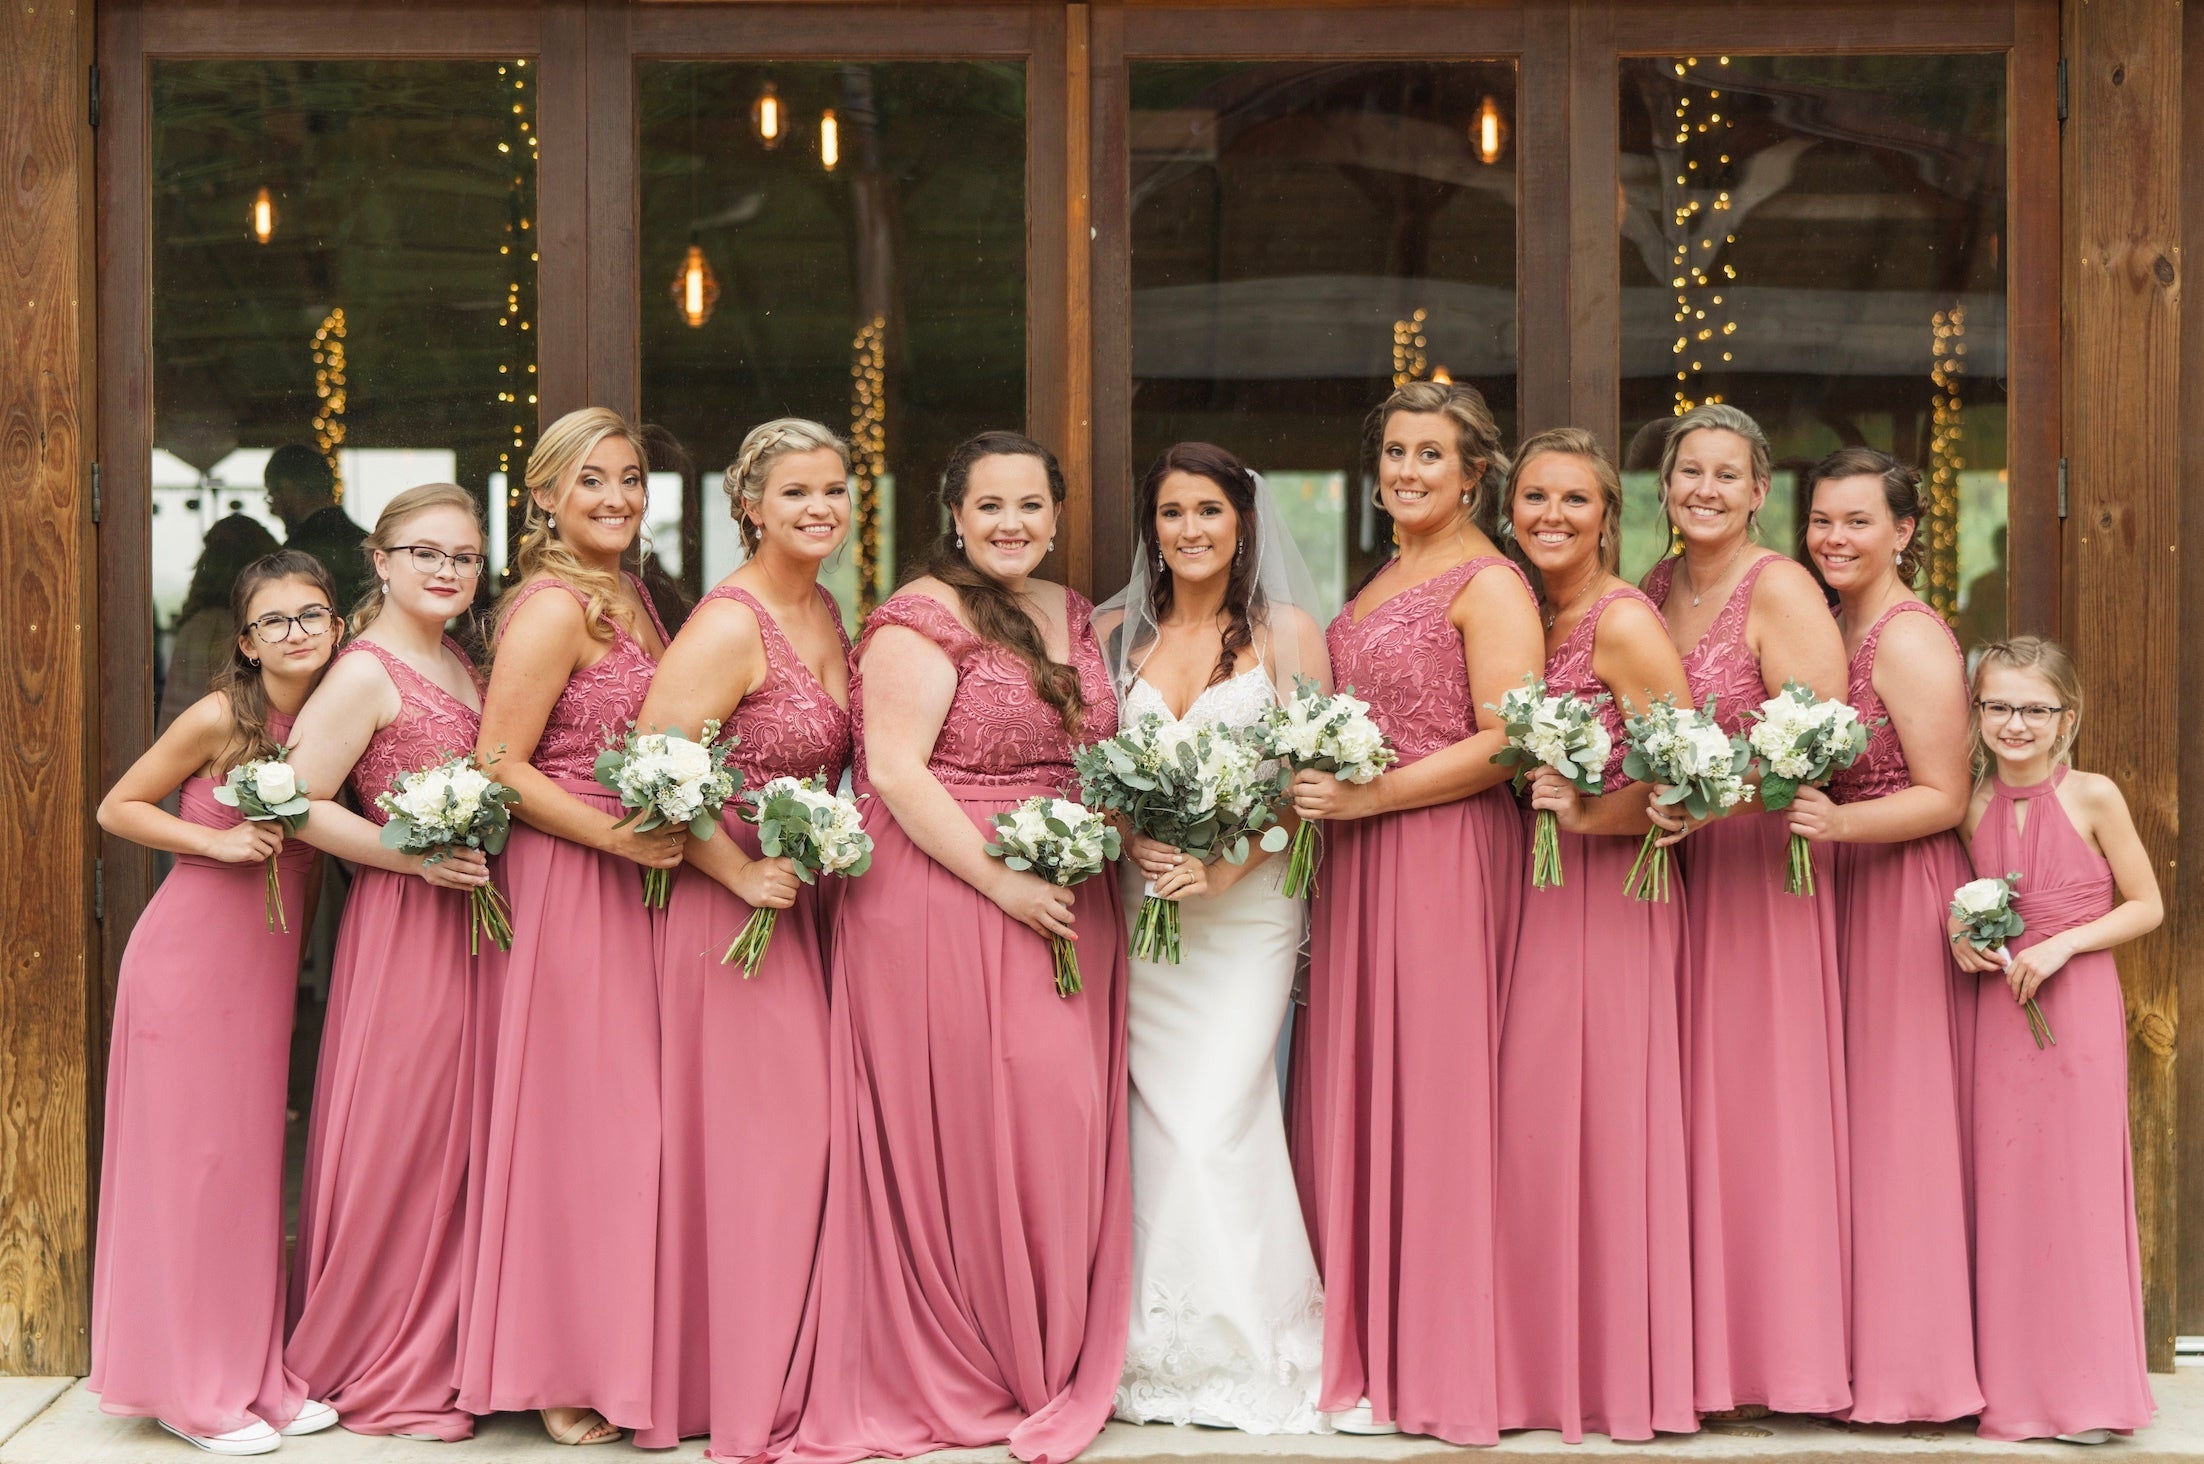 Bride and Bridal Party wearing Kennedy Blue Bridesmaid Dresses in 'Rosewood'.